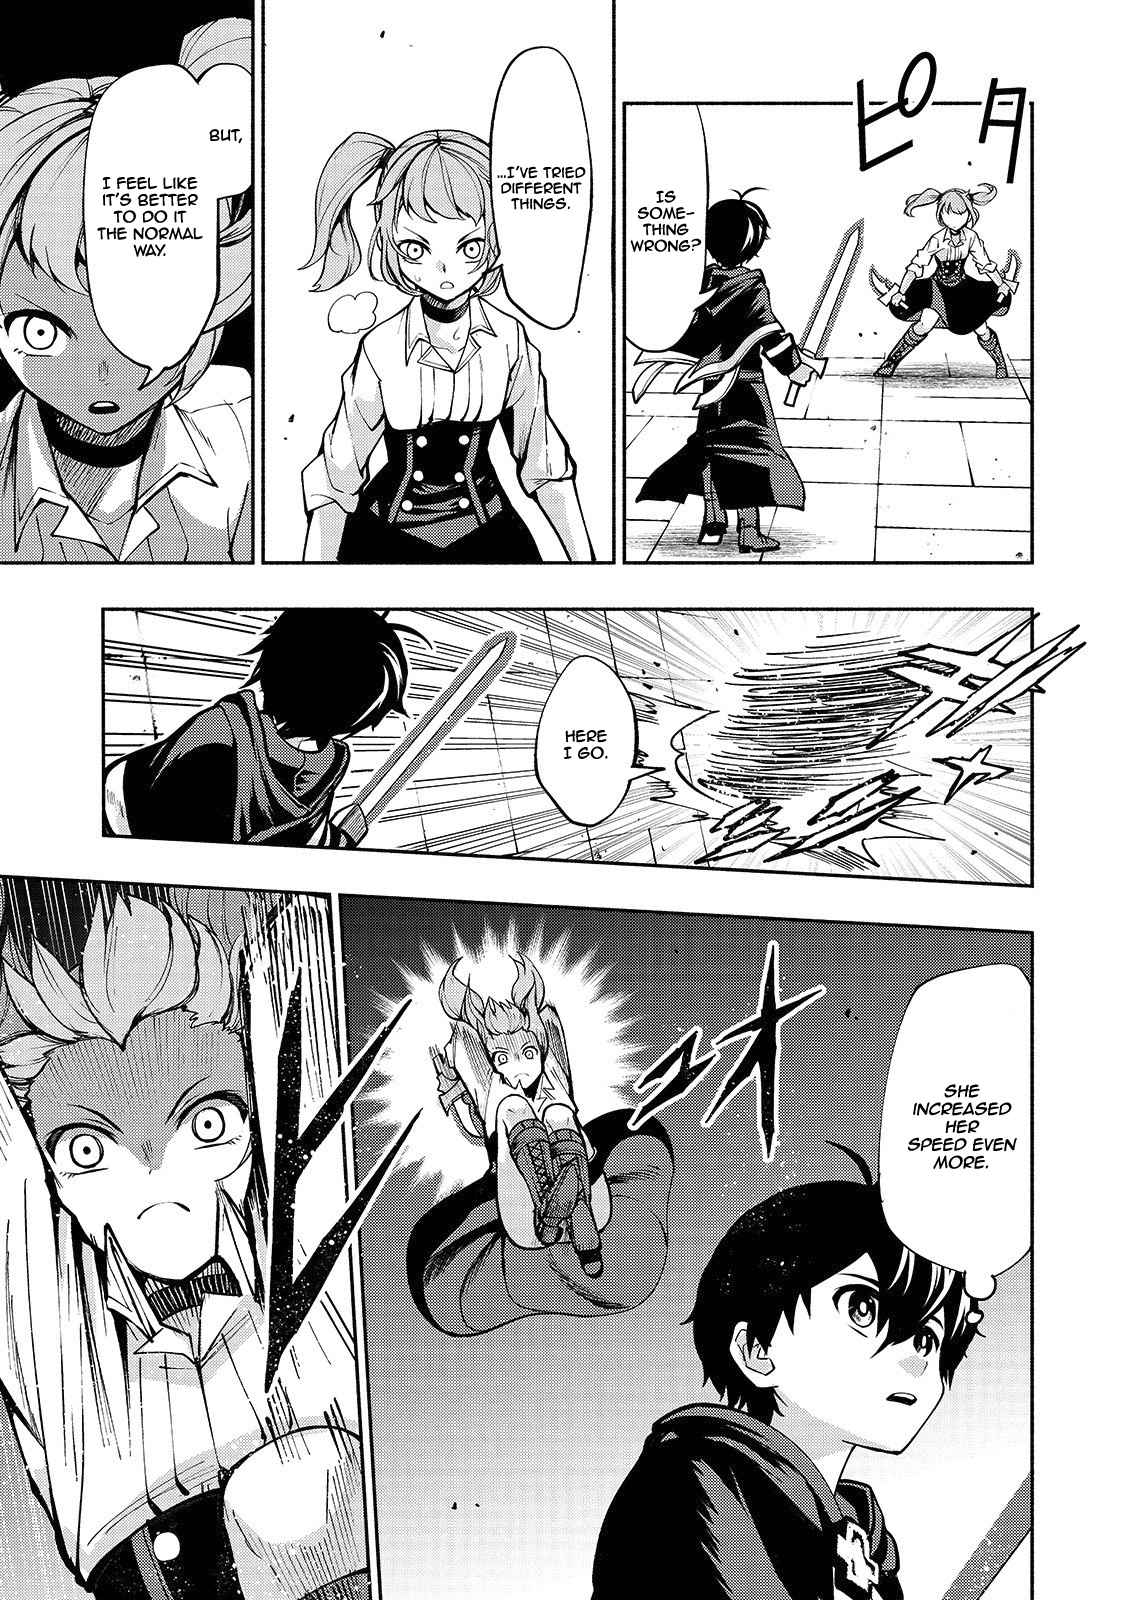 The Reincarnated "Sword Saint" Wants to Take It Easy Vol. 1 Ch. 5 Training Time